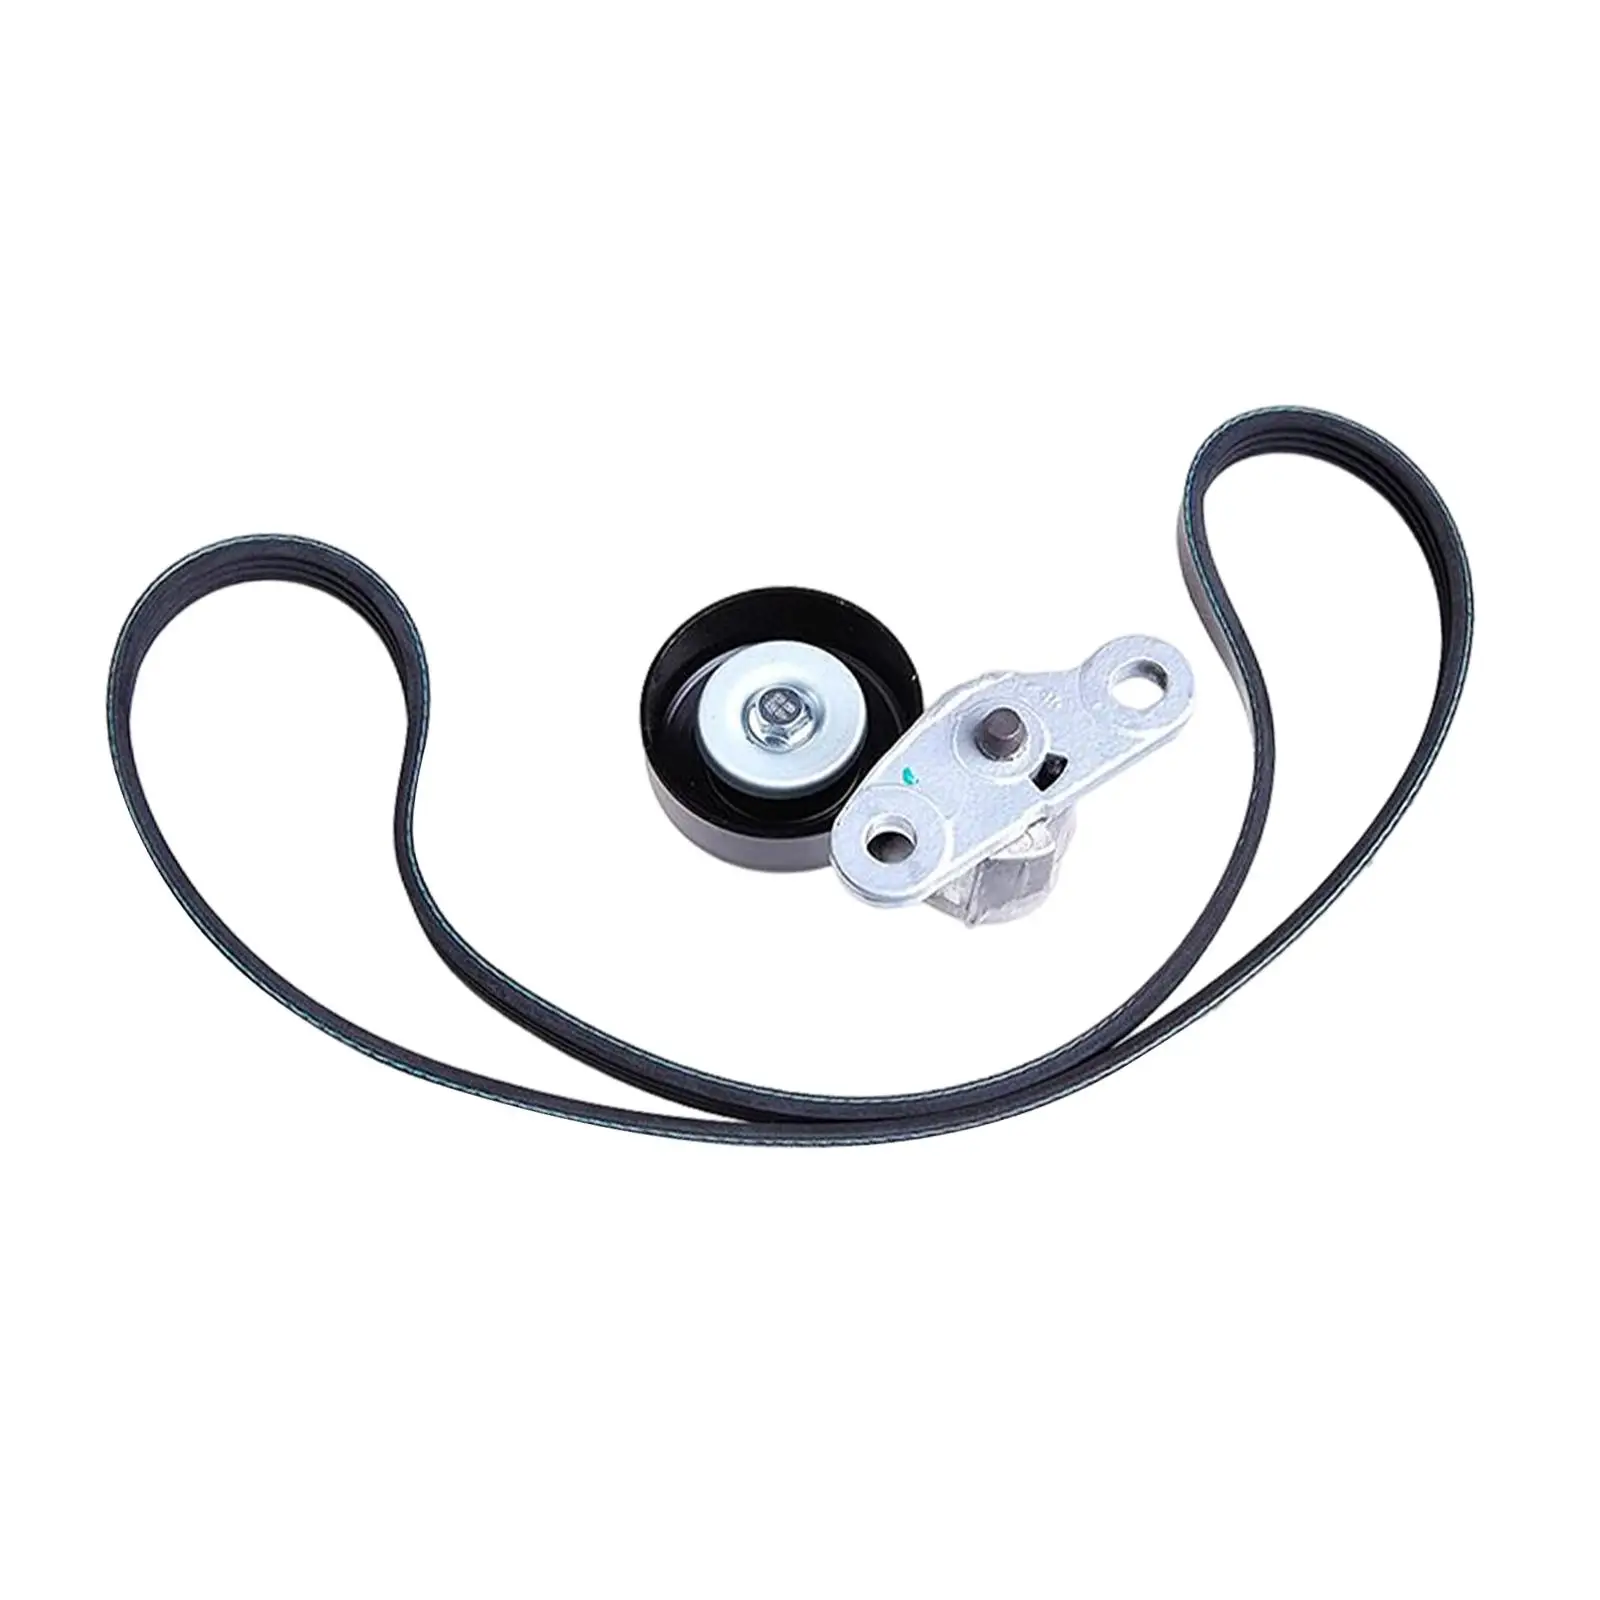 Complete Serpentine Belt Drive Component Kit Replace Part for GMC Sierra 1500 2500 3500 Car Accessories Easily to Install